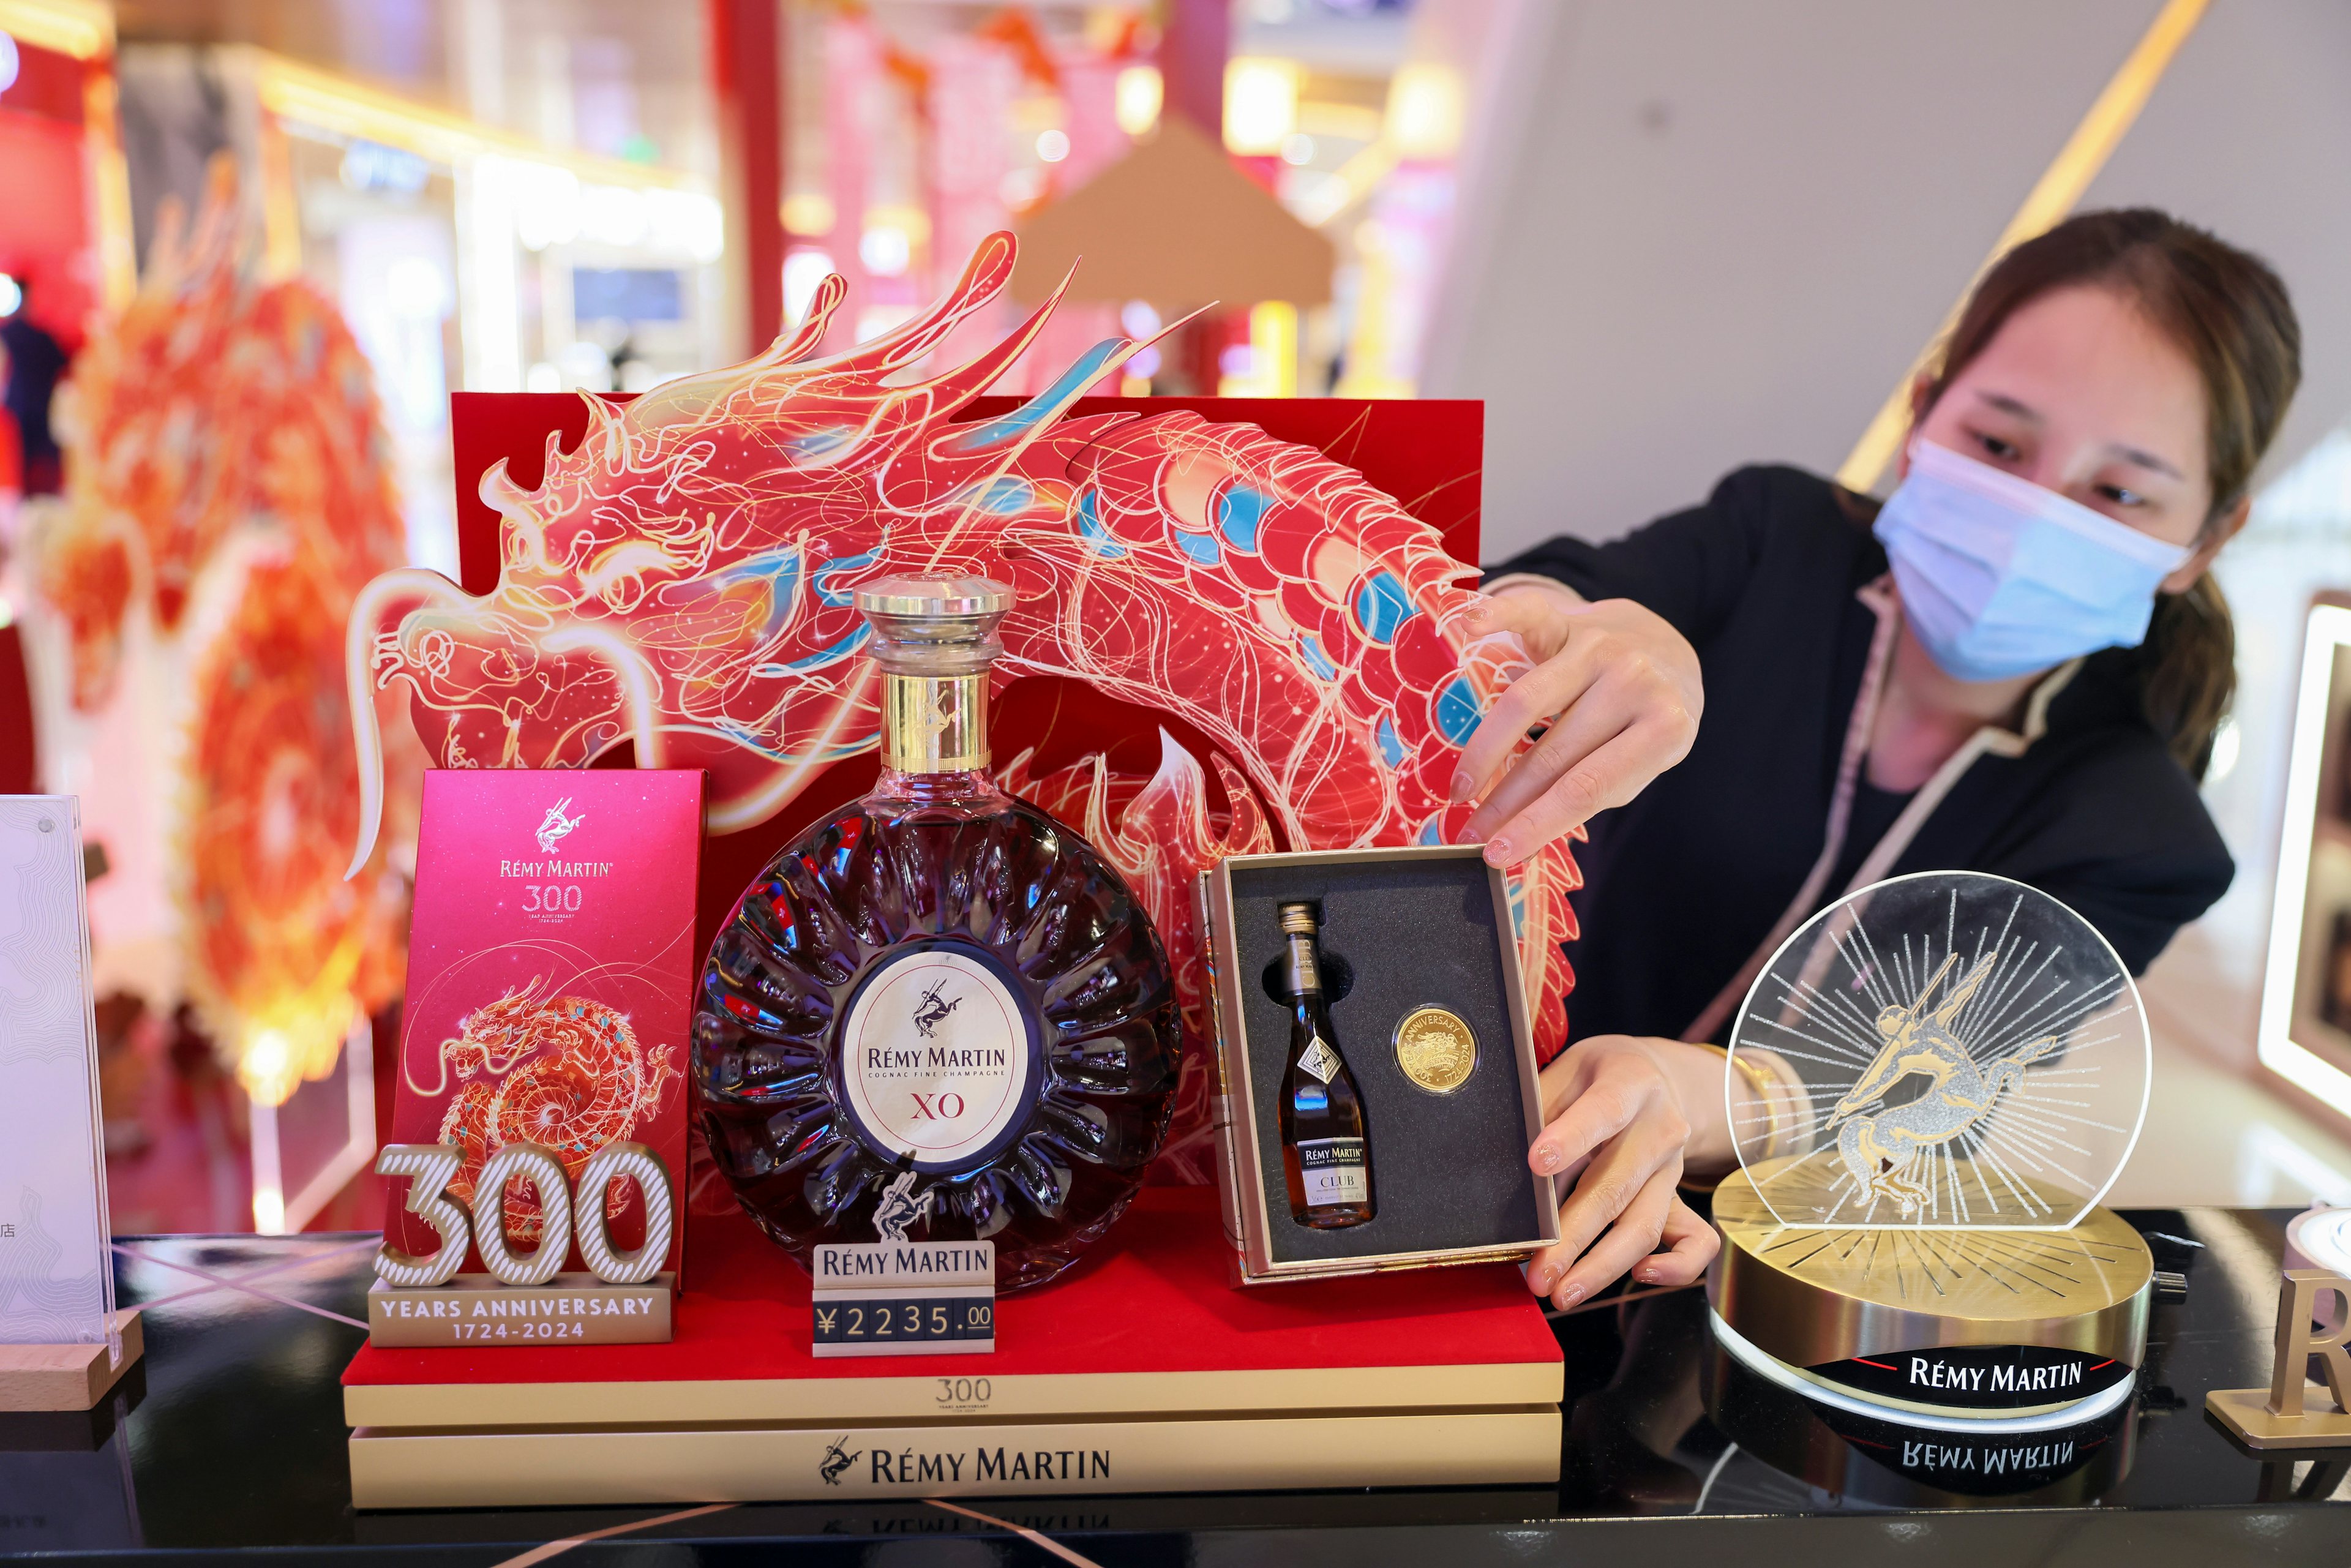 Dragon-themed limited edition wines are displayed for sale at GDF Plaza on February 7, 2024 in Haikou, Hainan Province. Photo: Ghetty Images